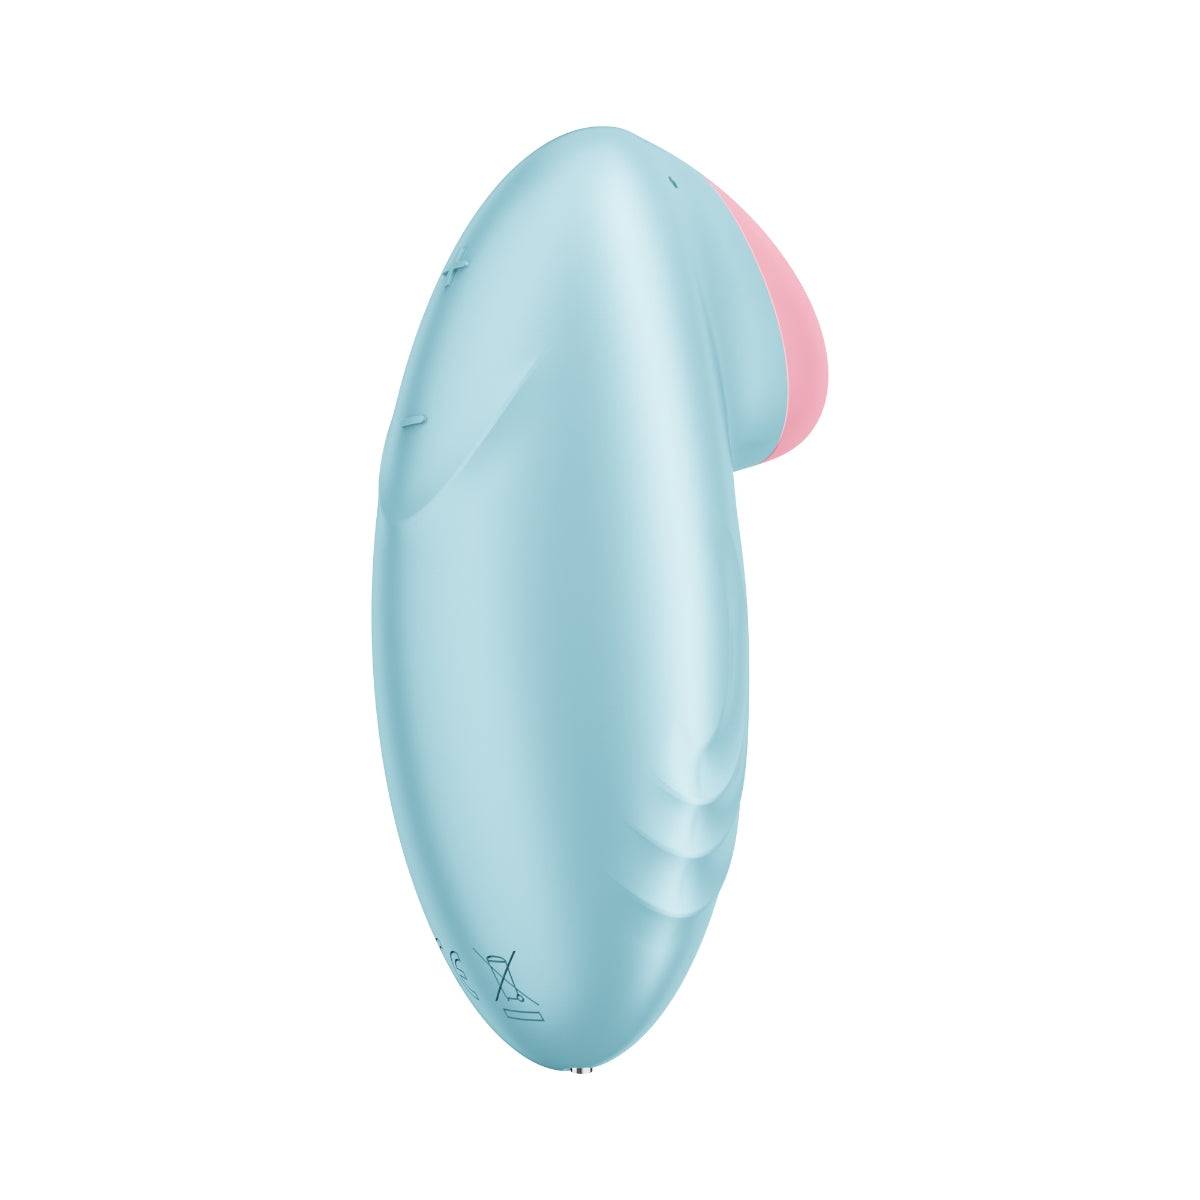 Satisfyer Tropical Tip Lay On Vibrator Blue